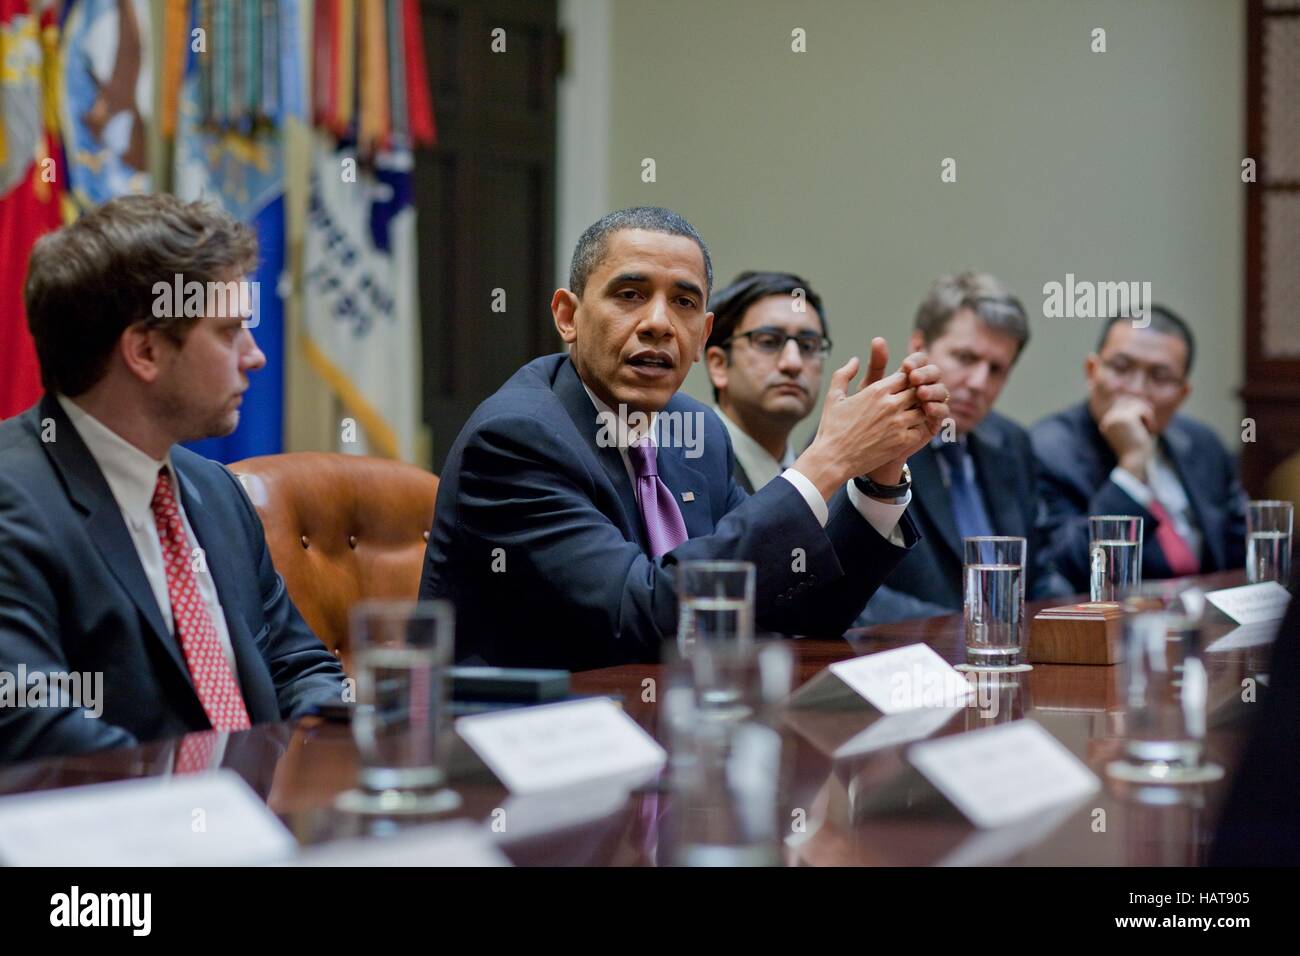 U.S. President Barack Obama meets with White House Fellows in the White House Roosevelt Room December 16, 2009 in Washington, DC. Stock Photo